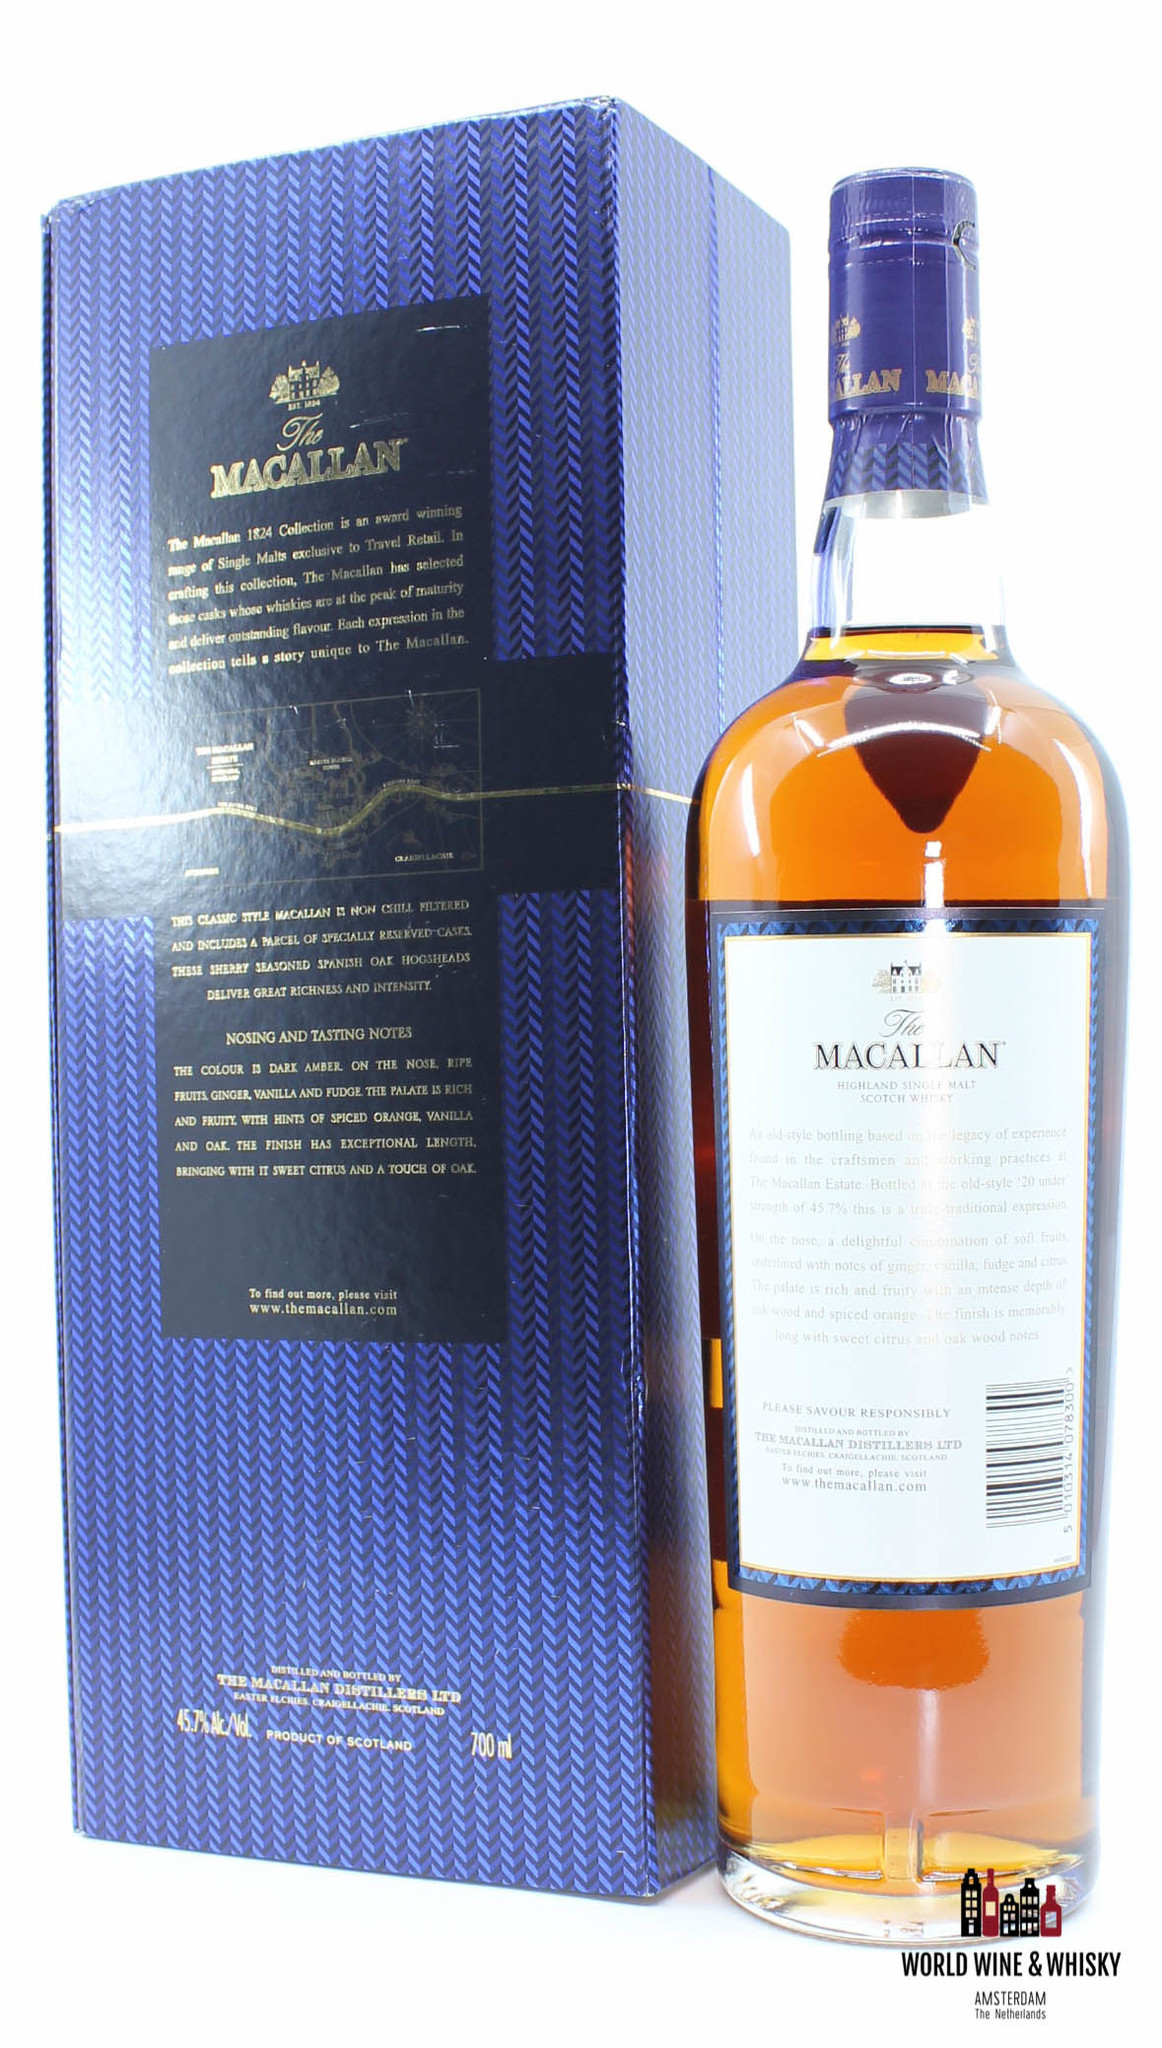 Macallan Estate Reserve The 1824 Collection 45 7 World Wine Whisky